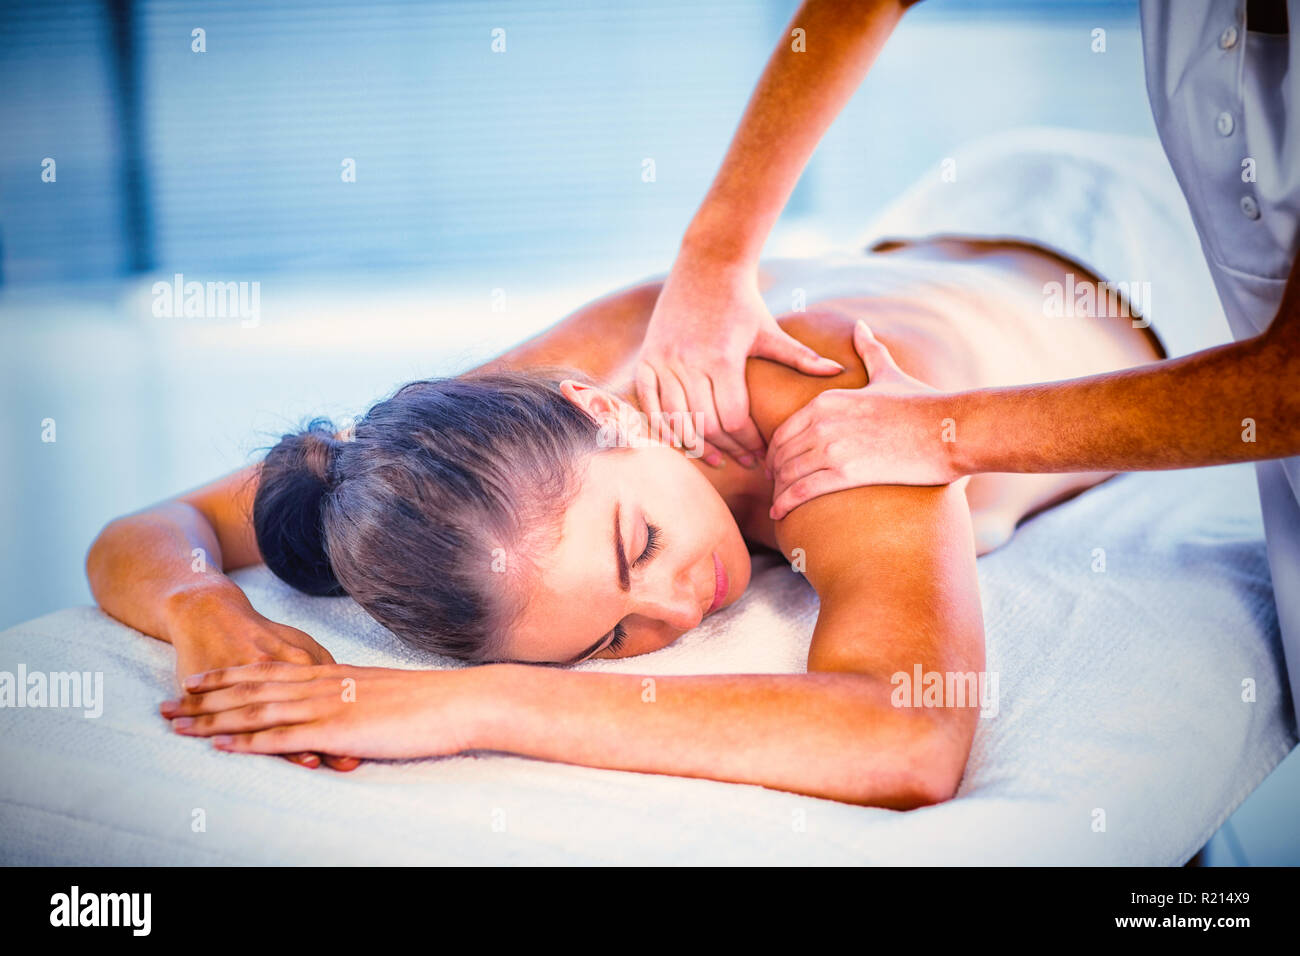 Relaxed naked woman receiving back massage Stock Photo